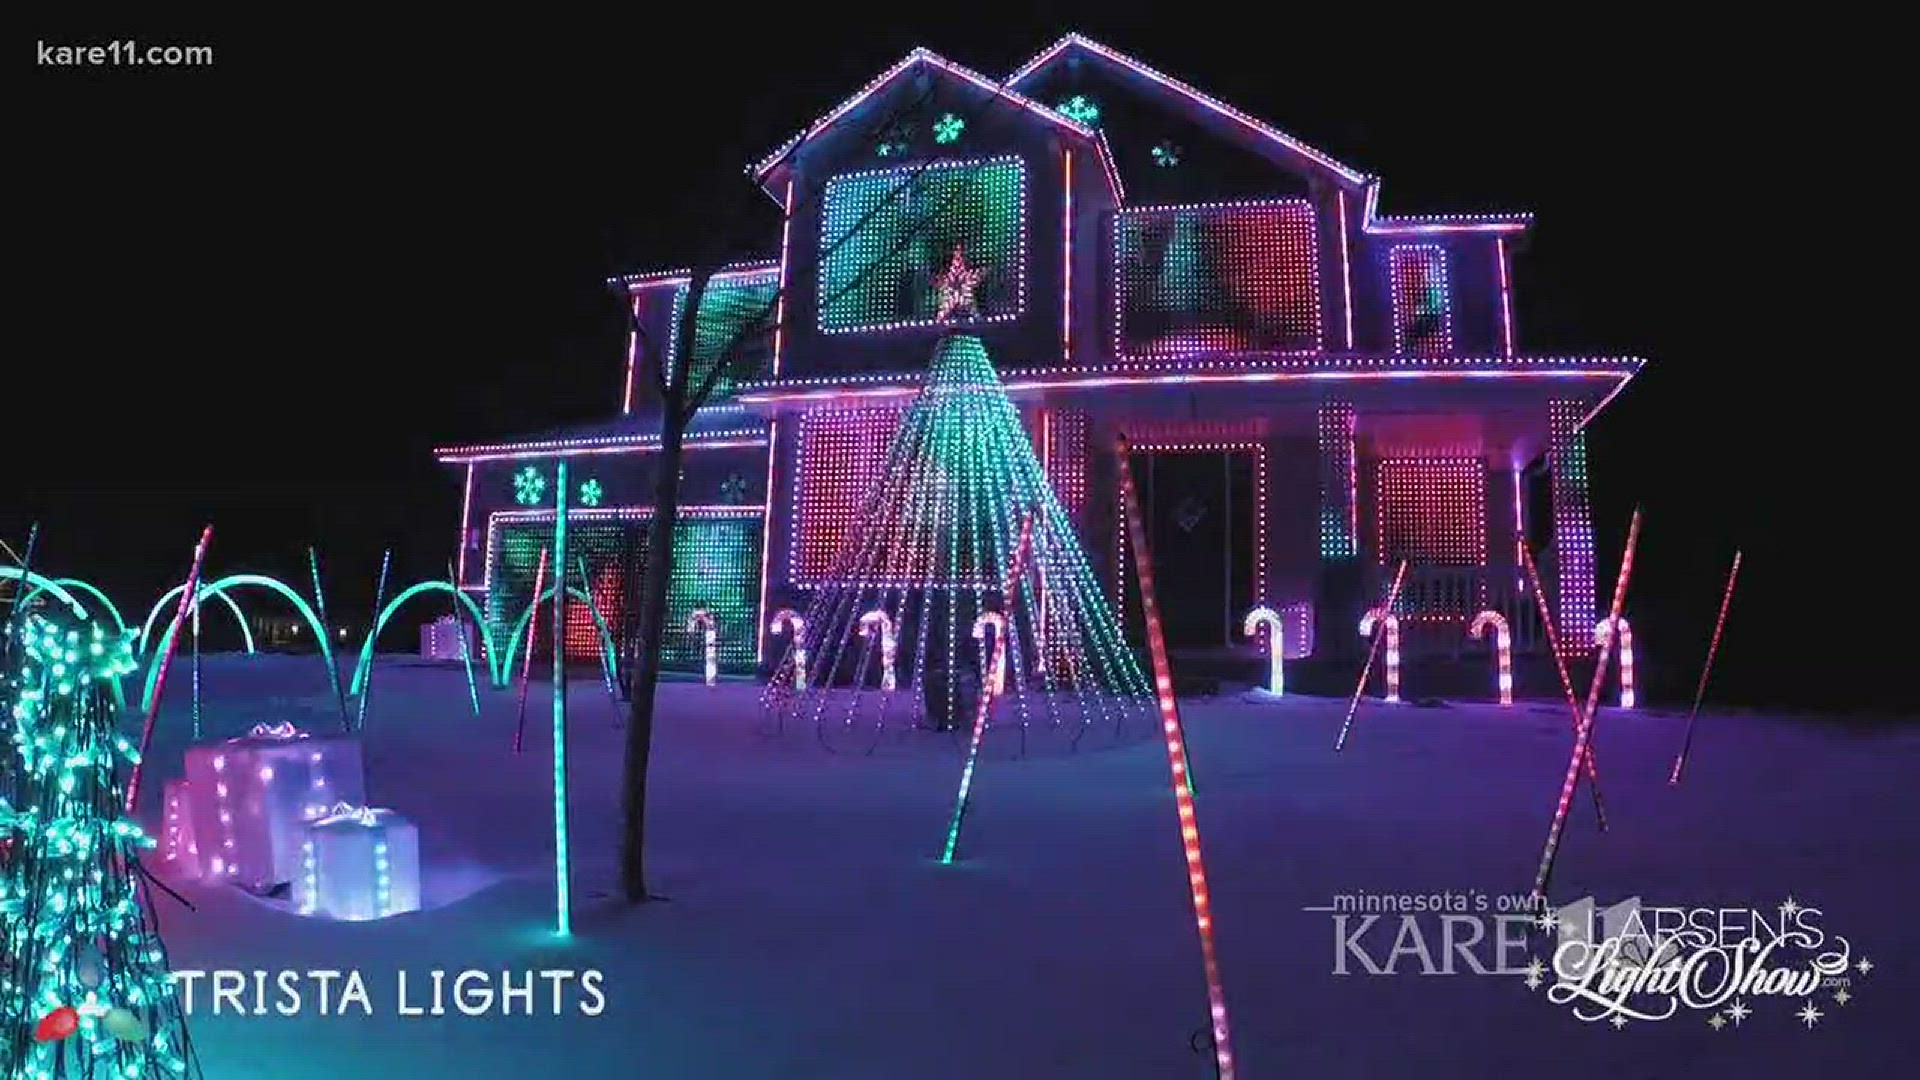 One of the most popular residential holiday light displays in the Twin Cities is shutting down permanently, blaming disruption in the neighborhood caused by guests on party bus tours. http://kare11.tv/2kPGeIb